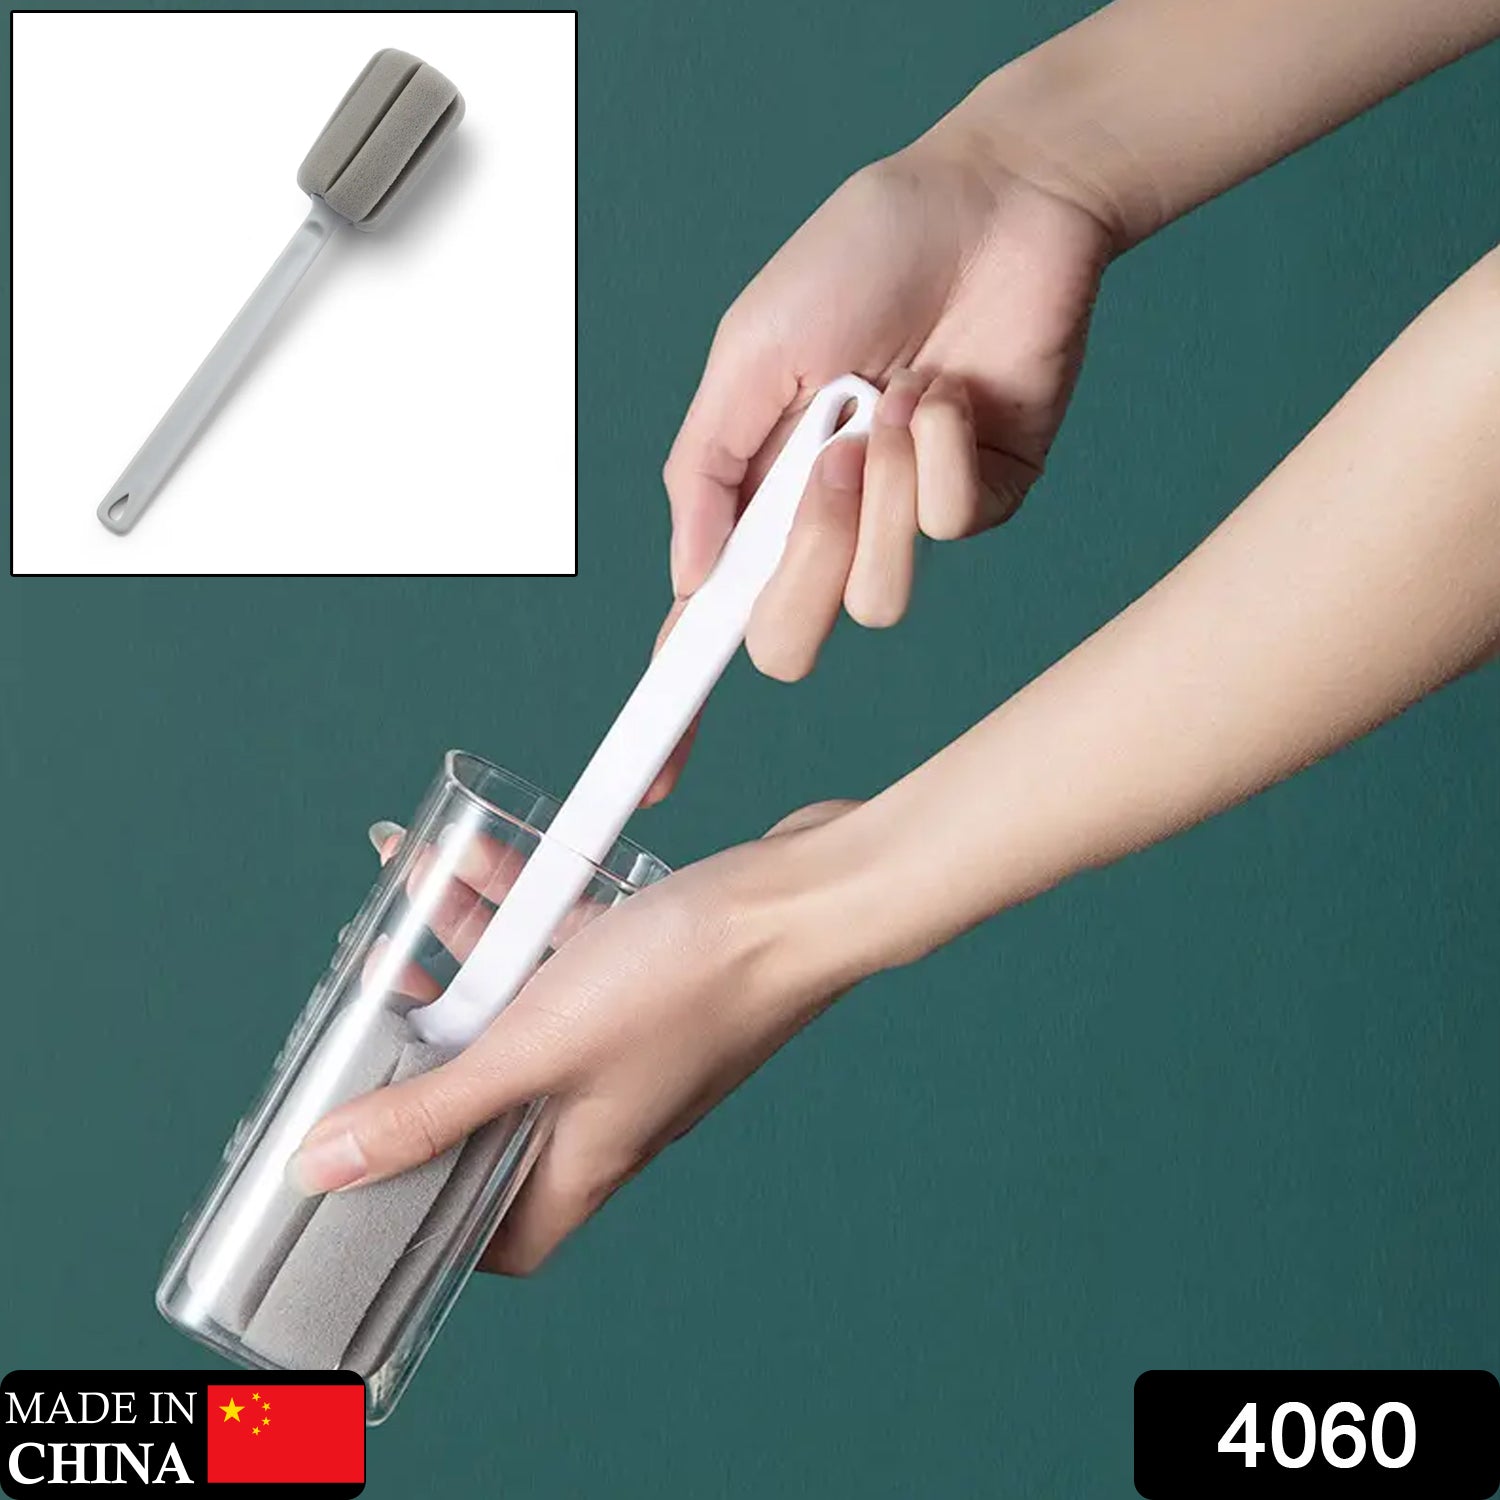 4060 Cleaning Brush Cleaner with Plastic Long Handle , Soft Dish Washing Foam Cleaning Brushes For Cups Mugs Kettles Wine Glasses and Baby Bottles DeoDap